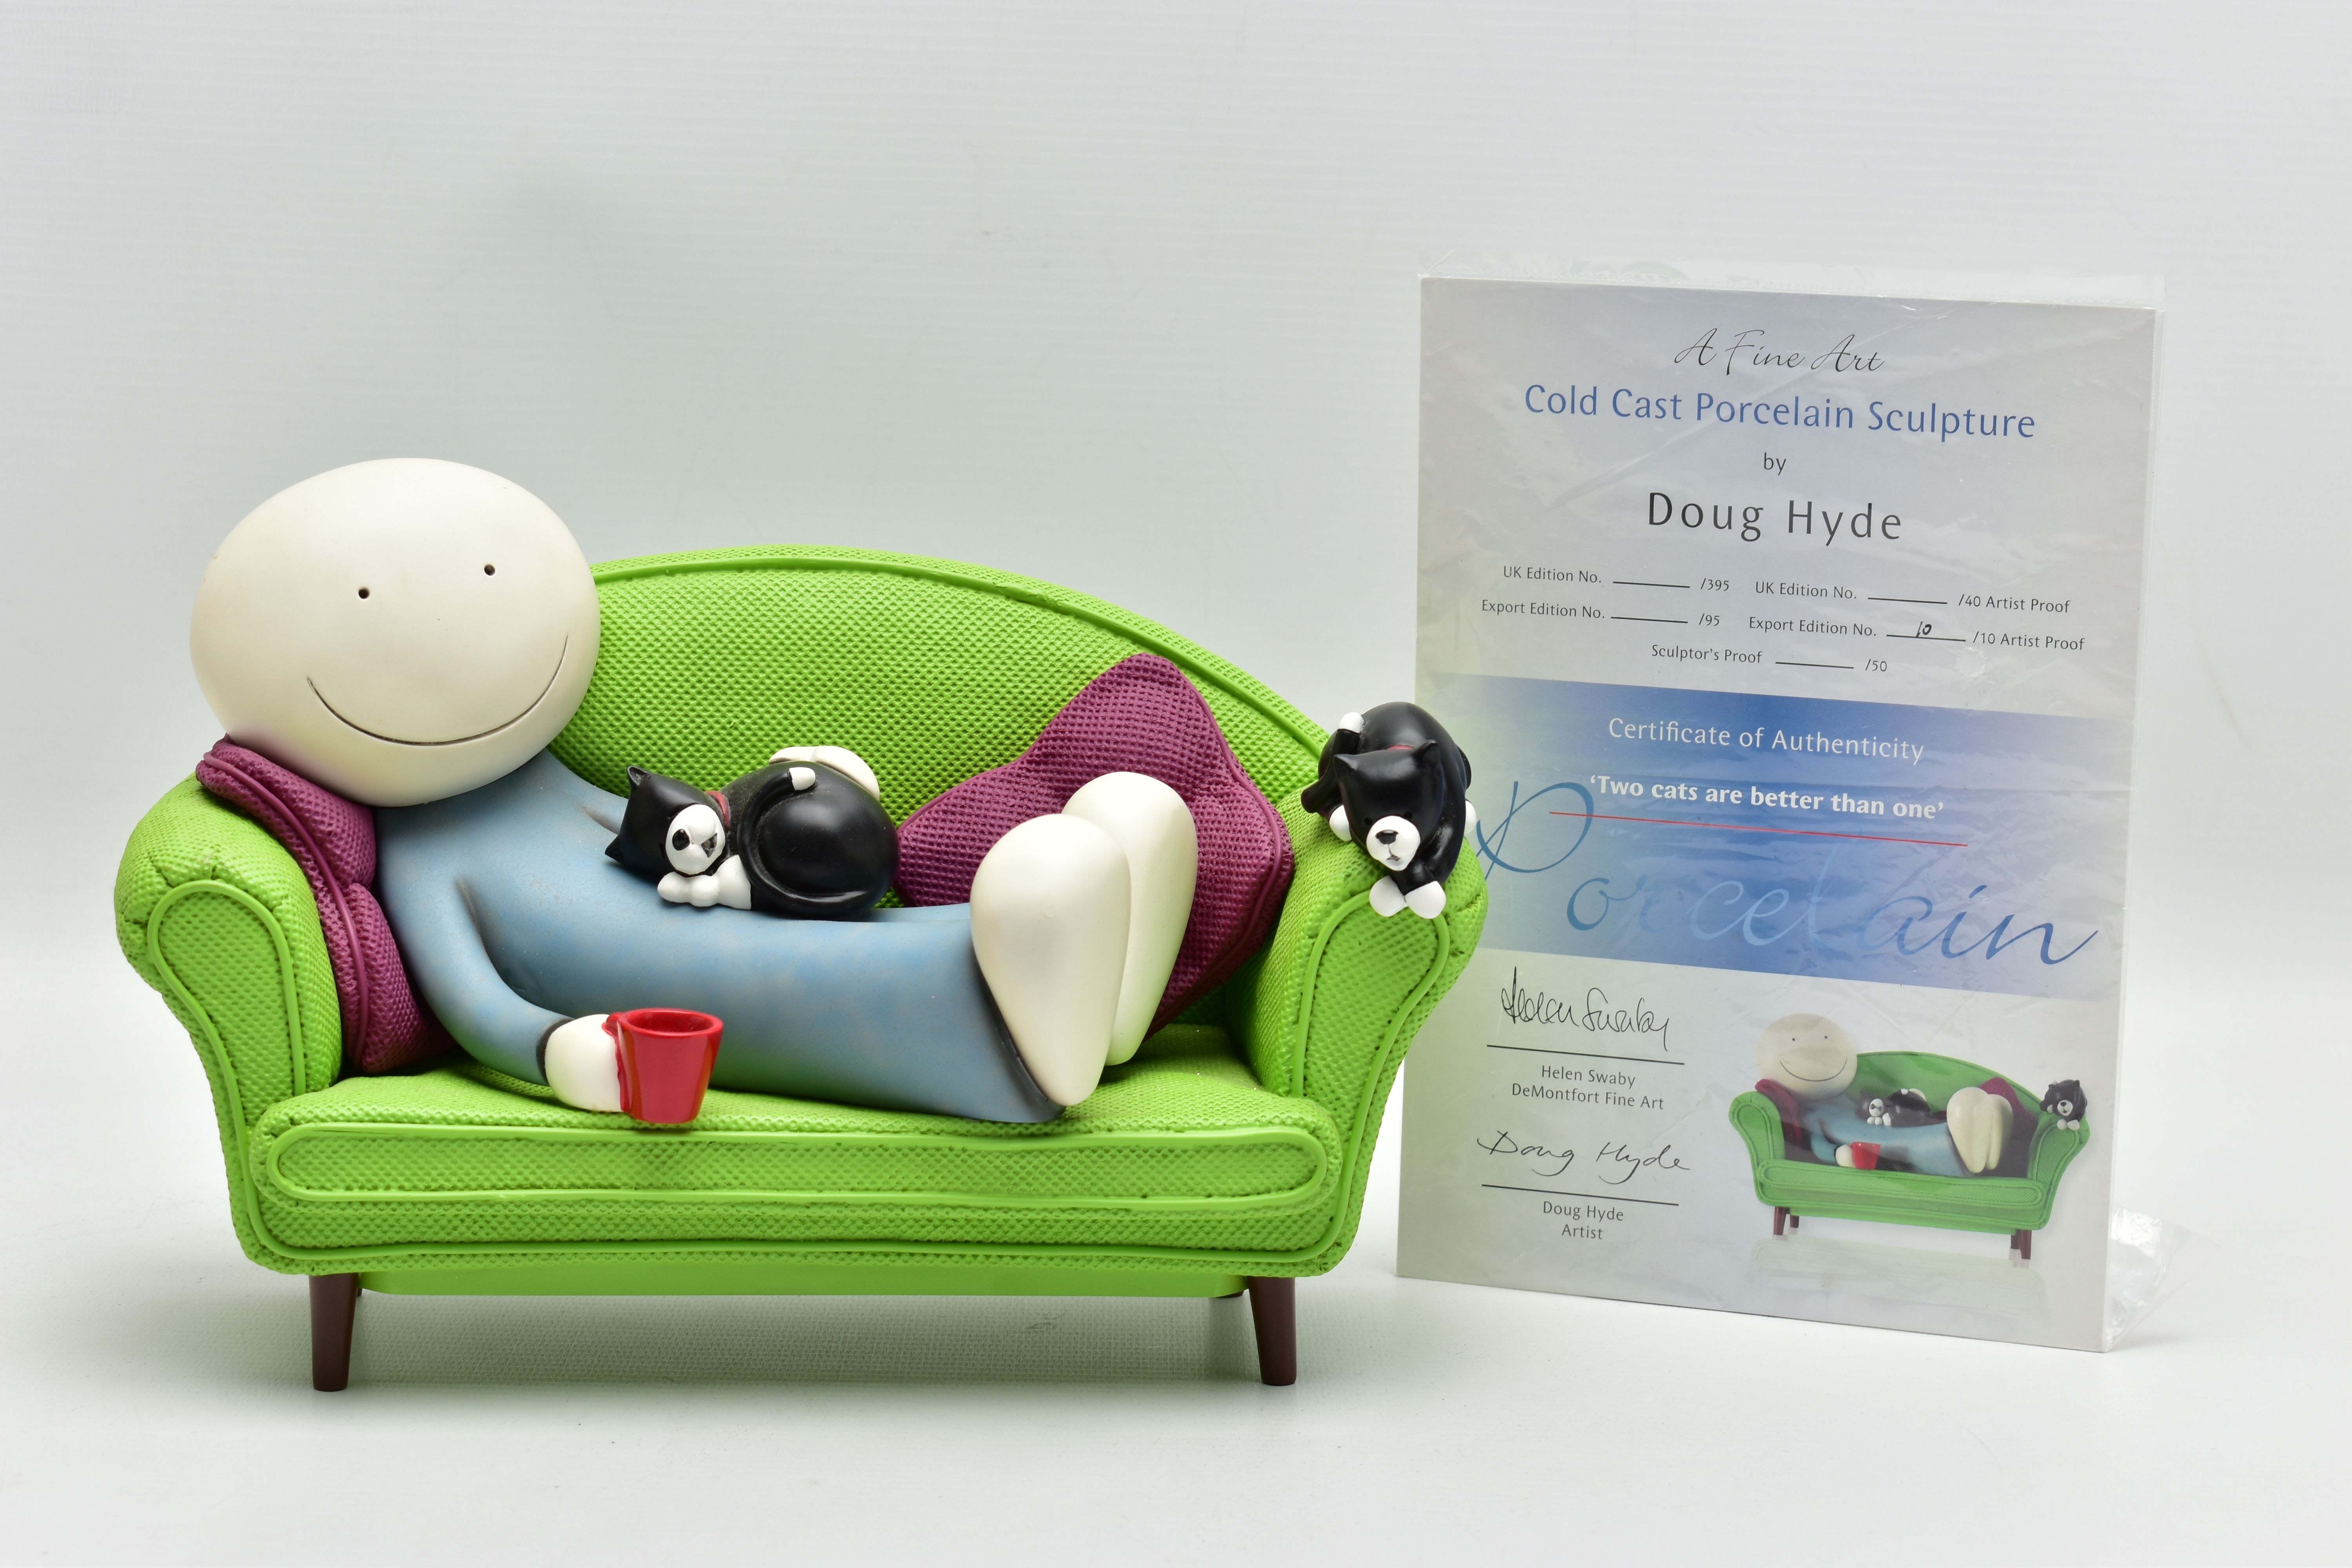 DOUG HYDE (BRITISH 1972) 'TWO CATS ARE BETTER THAN ONE', an artist proof sculpture depicting a boy